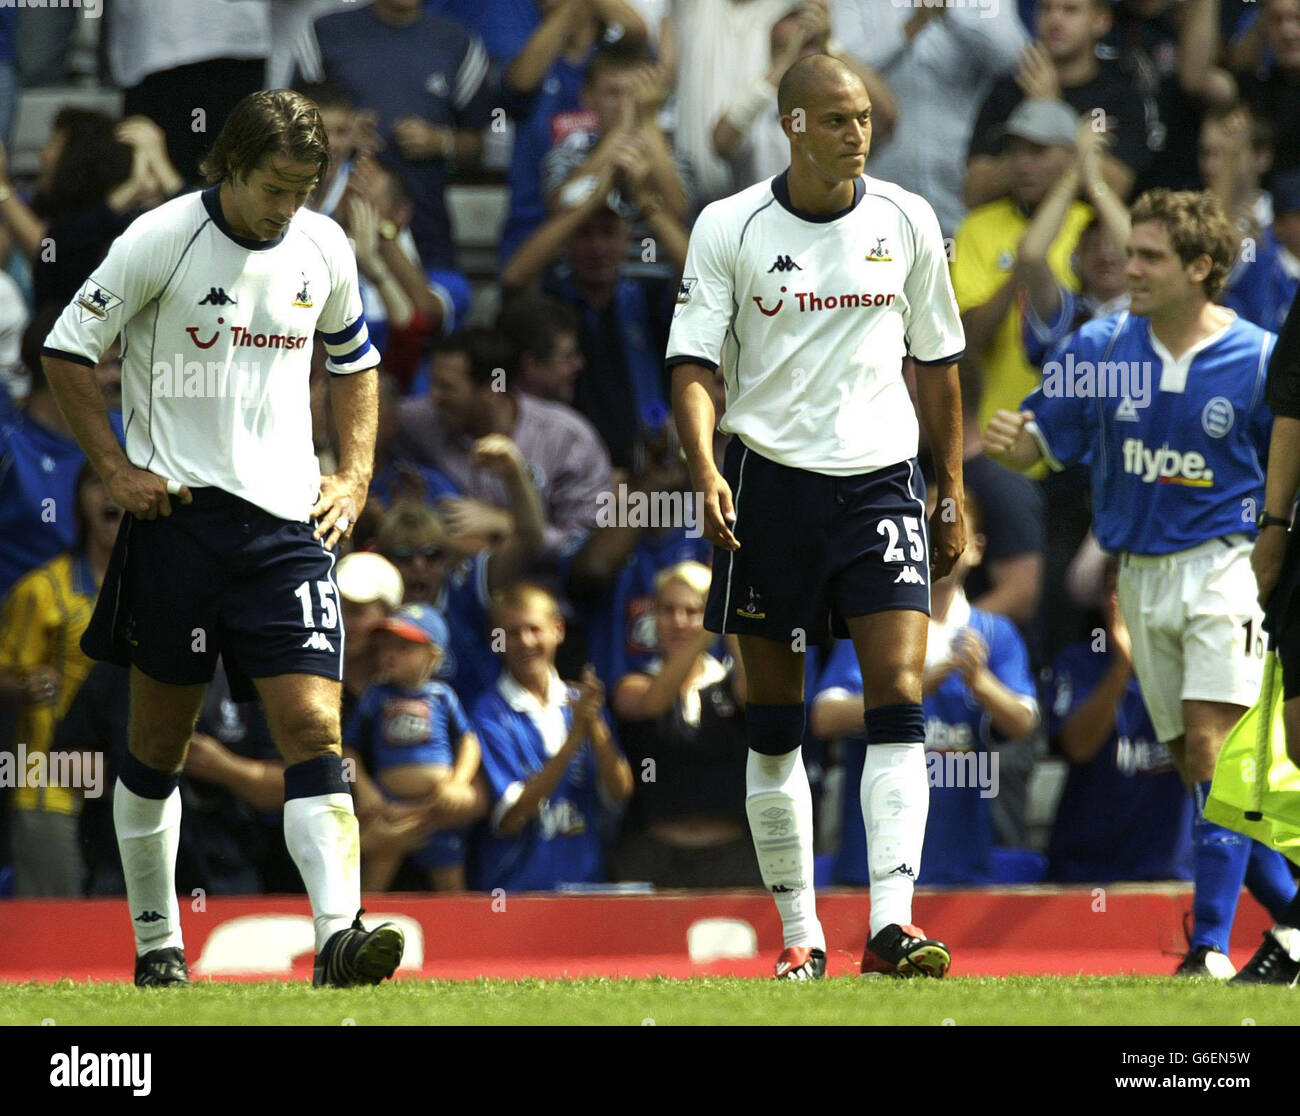 Tottenham Hotspur's Jamie Redknapp & Bobby Zamora (centre) show their dejection as Birmingham City's goalscorer David Dunn (right) celebrates at the final whistle after Birmingham City's 1.0 win over Tottenham Hotspur in the FA Barclaycard Premiership match at St Andrews, Birmingham. Stock Photo